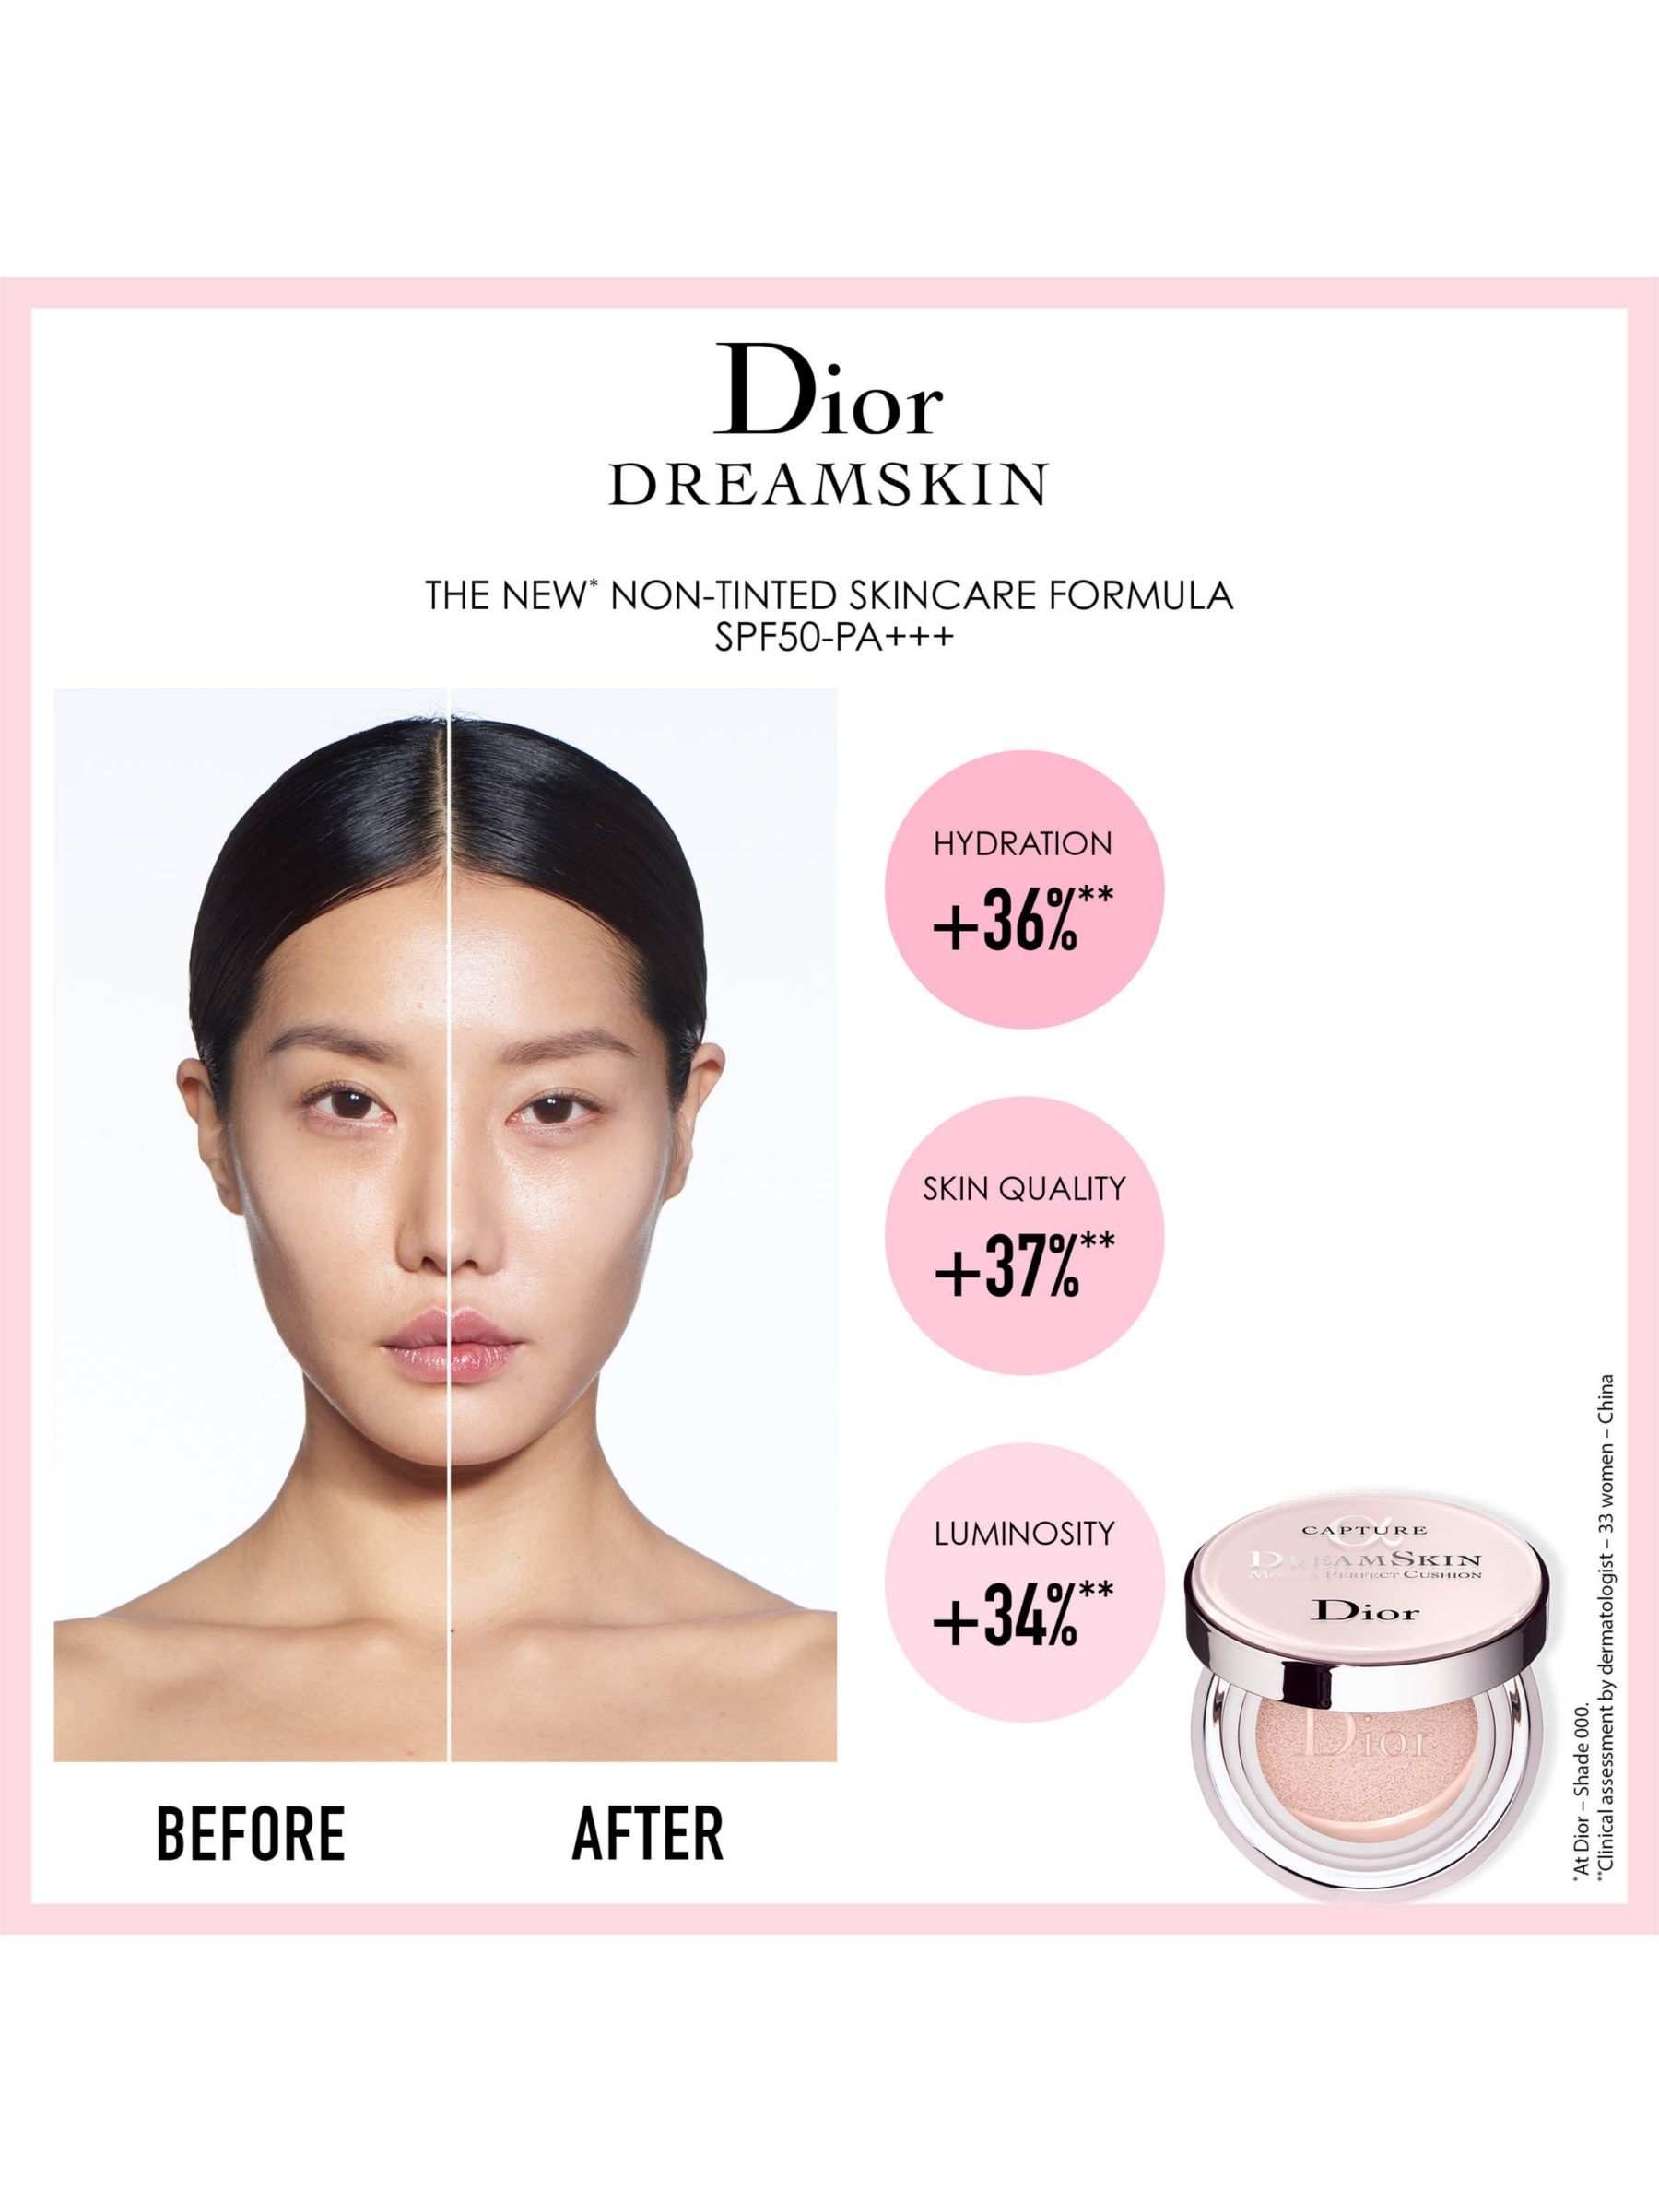 dior totale dreamskin review